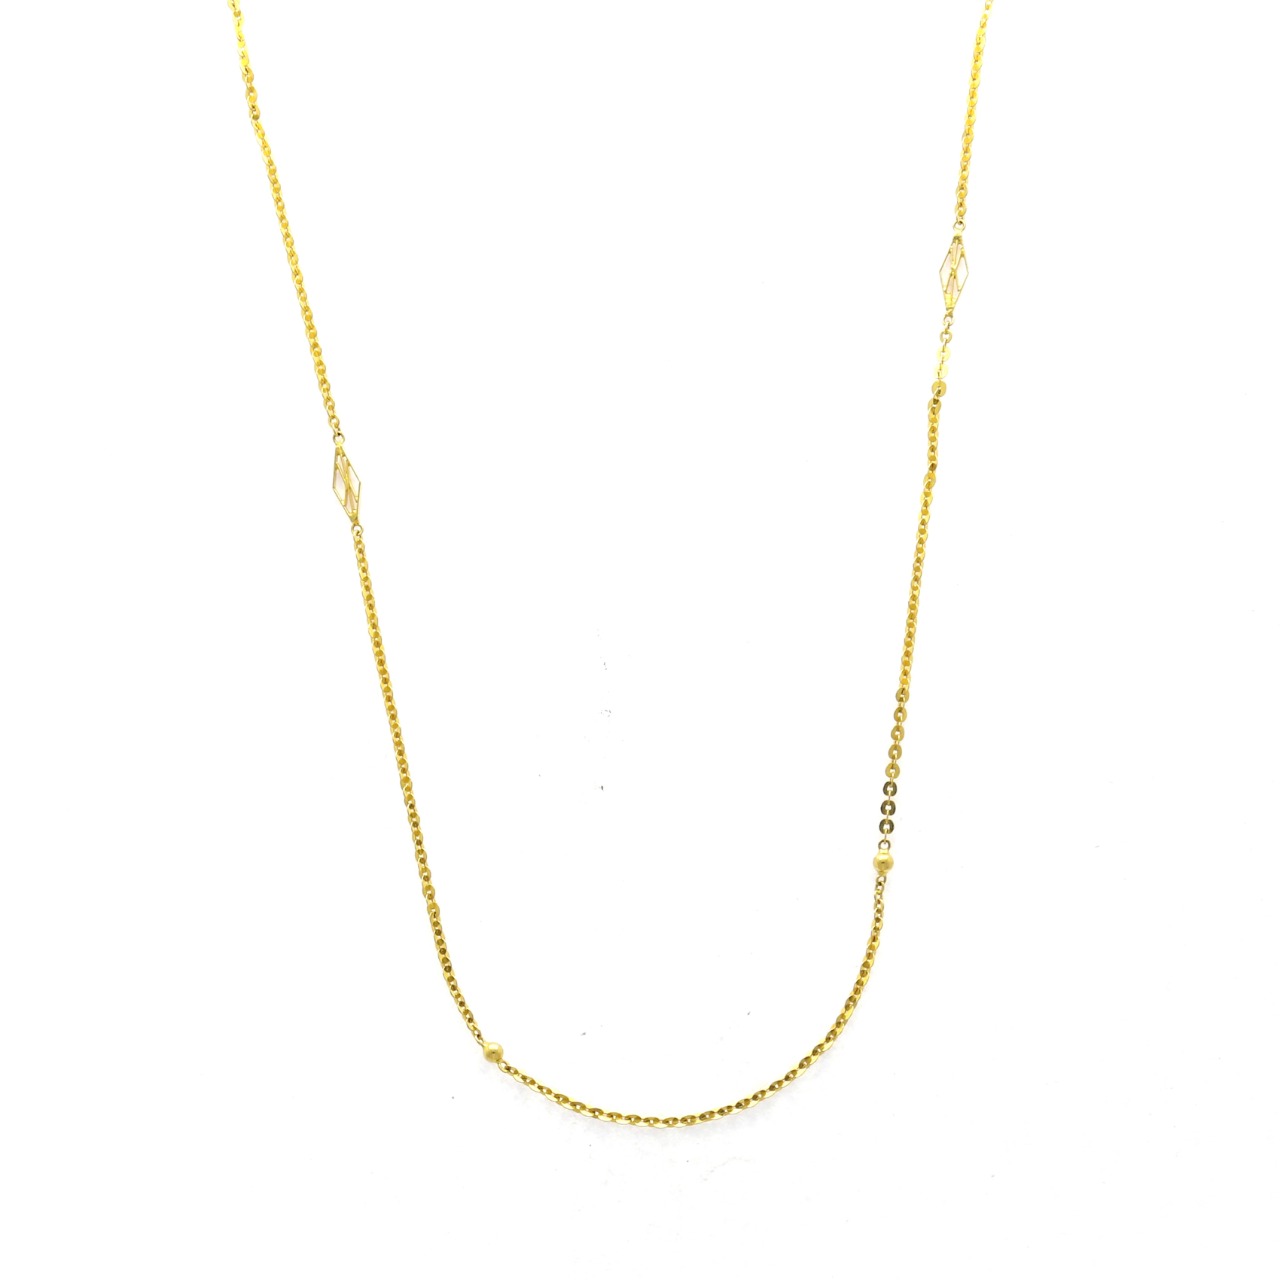 Charming Light-Weight 22k Gold Chain For Ladies